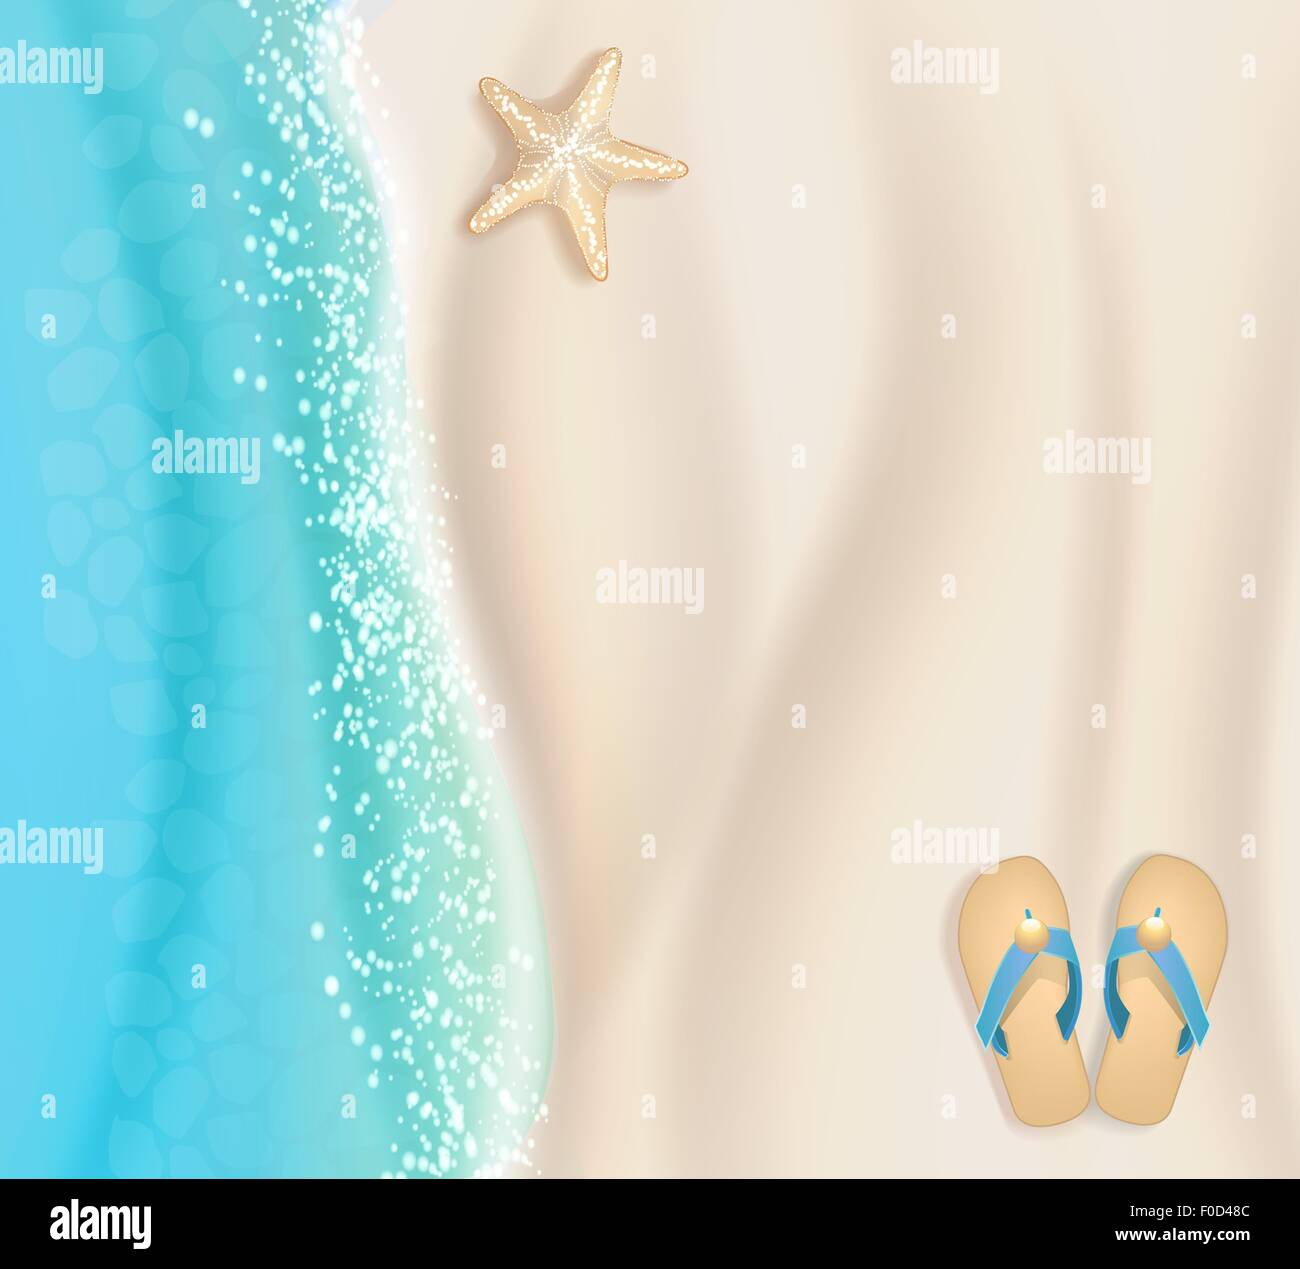 beach background with sand, water and starfish Stock Vector